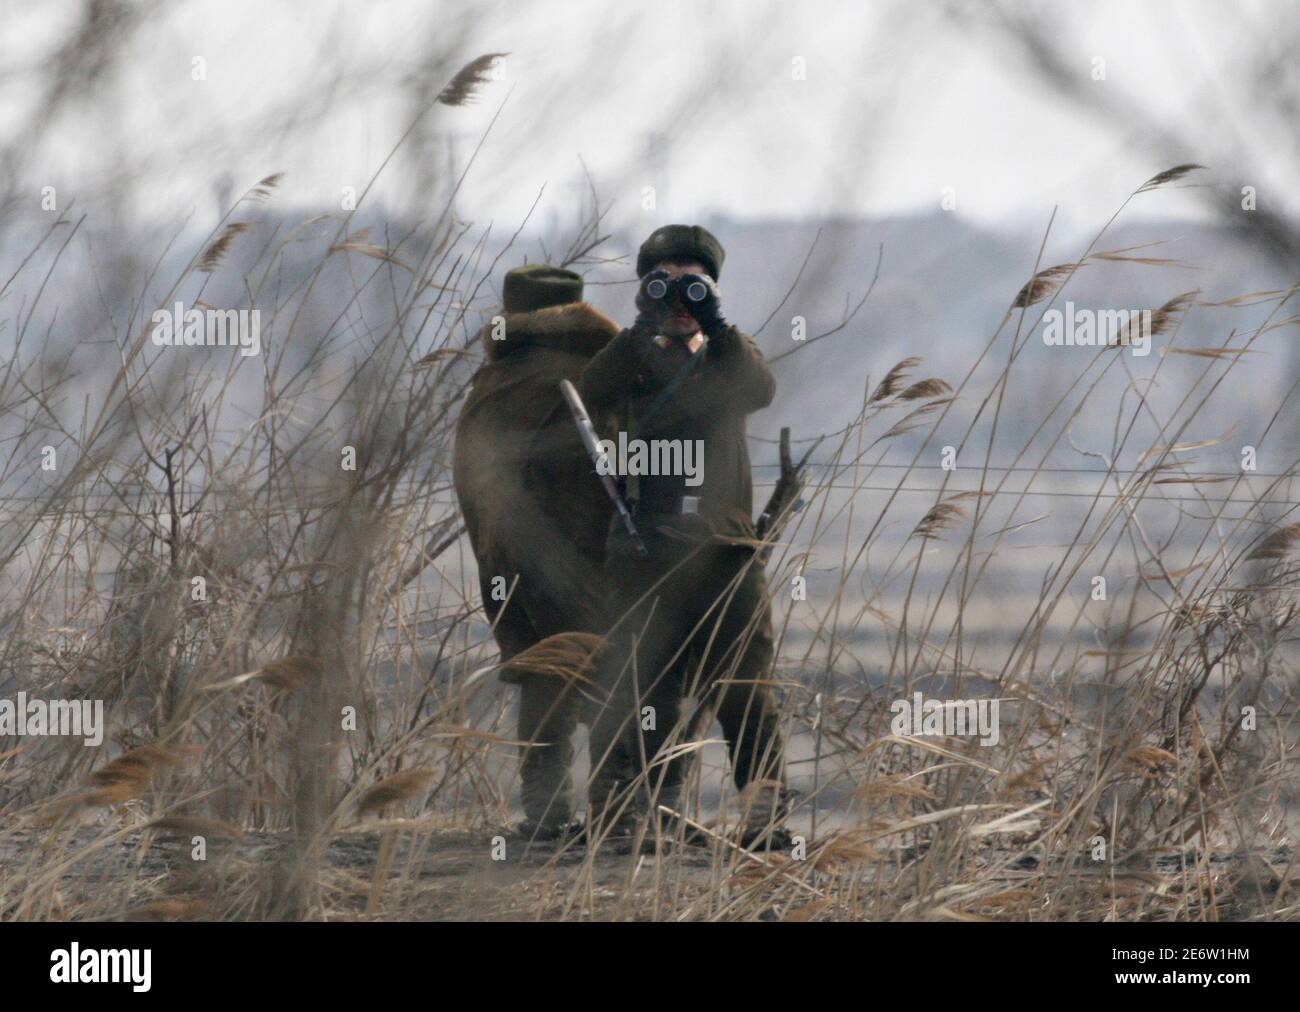 North Korean soldiers guard the banks of Yalu River near the North Korean town of Sinuiju, opposite the Chinese border city of Dandong February 25, 2010. North Korea's neighbours and the United States want fresh momentum in trying to restart talks about ending Pyongyang's nuclear arms programme, a U.S. envoy said, while giving no signs of an impending breakthrough. REUTERS/Jacky Chen (NORTH KOREA - Tags: POLITICS MILITARY) Stock Photo